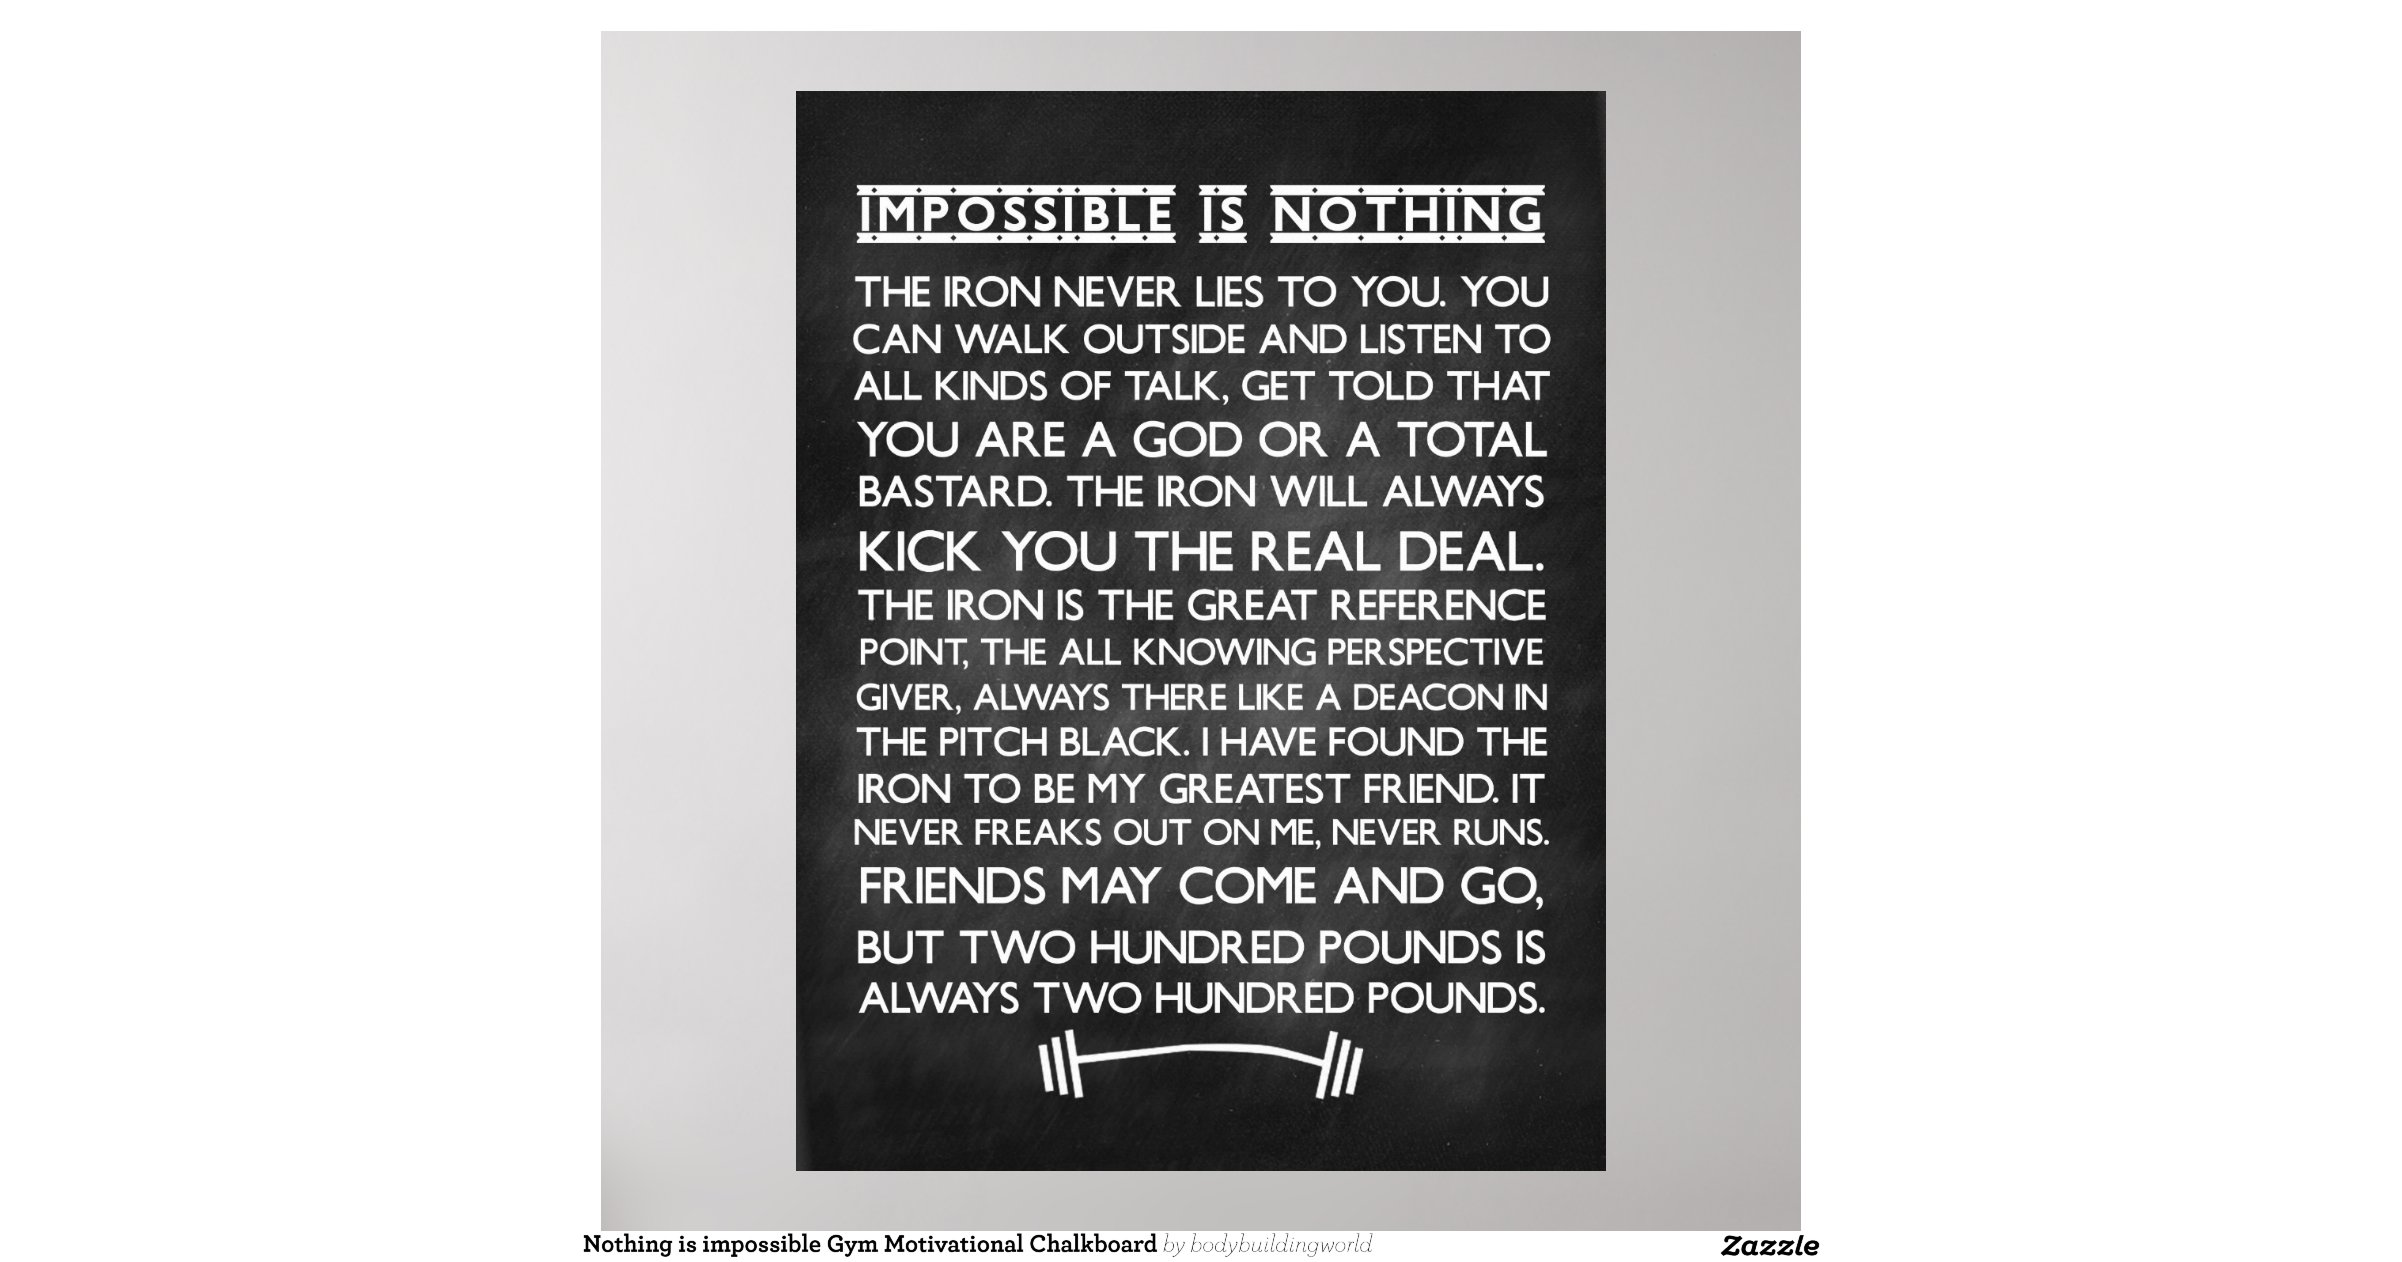 nothing_is_impossible_gym_motivational_chalkboard_poster r7c519f5fe0ab43f8bc0a2fac8eabaa0c_urg_8byvr_1200